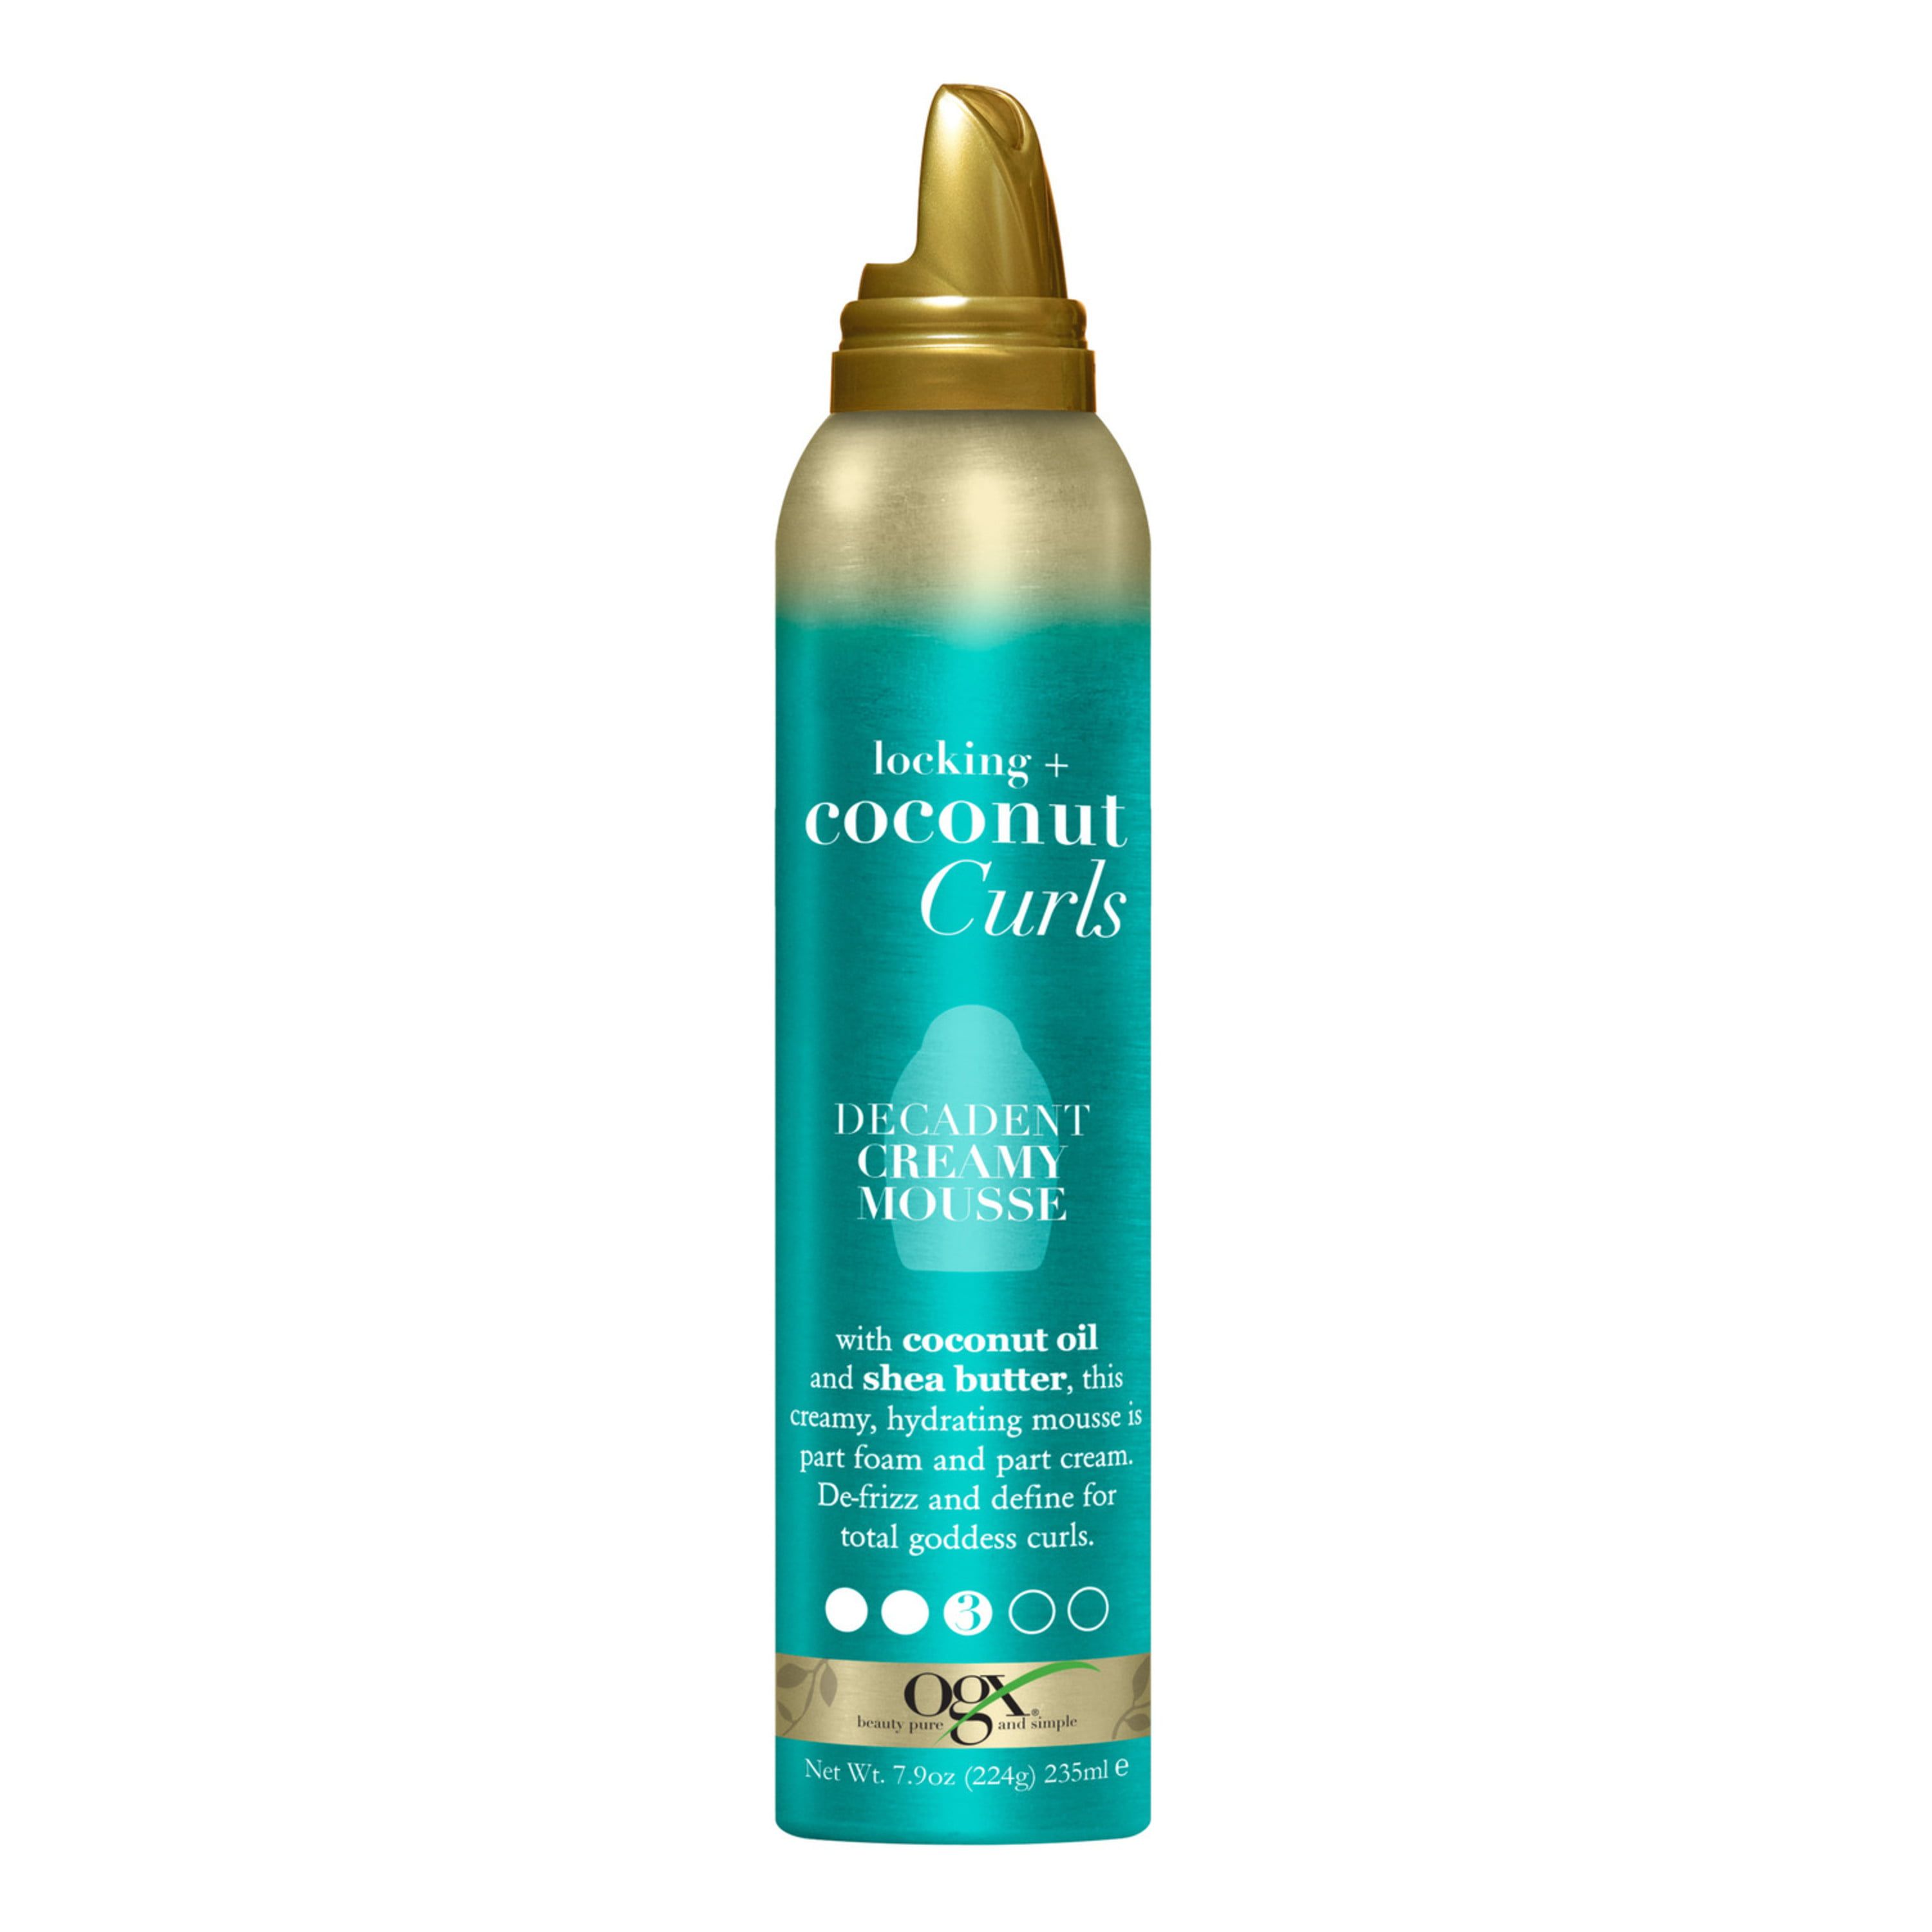 Locking + Coconut Curls Enhancing Decadent Creamy Hair Styling Mousse